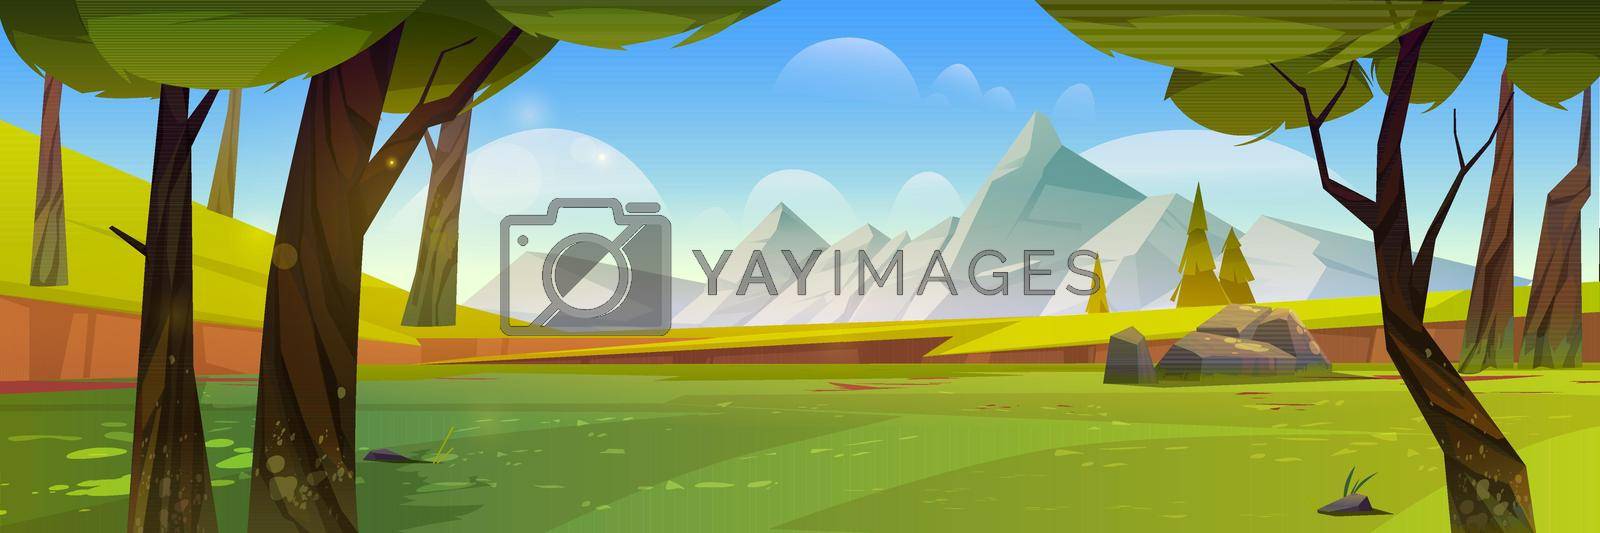 Cartoon nature landscape with mountains, green field, rocks and trees. Summer forest under blue sky with clouds, scenery view tranquil 2d game background, beautiful woodland, Vector illustration